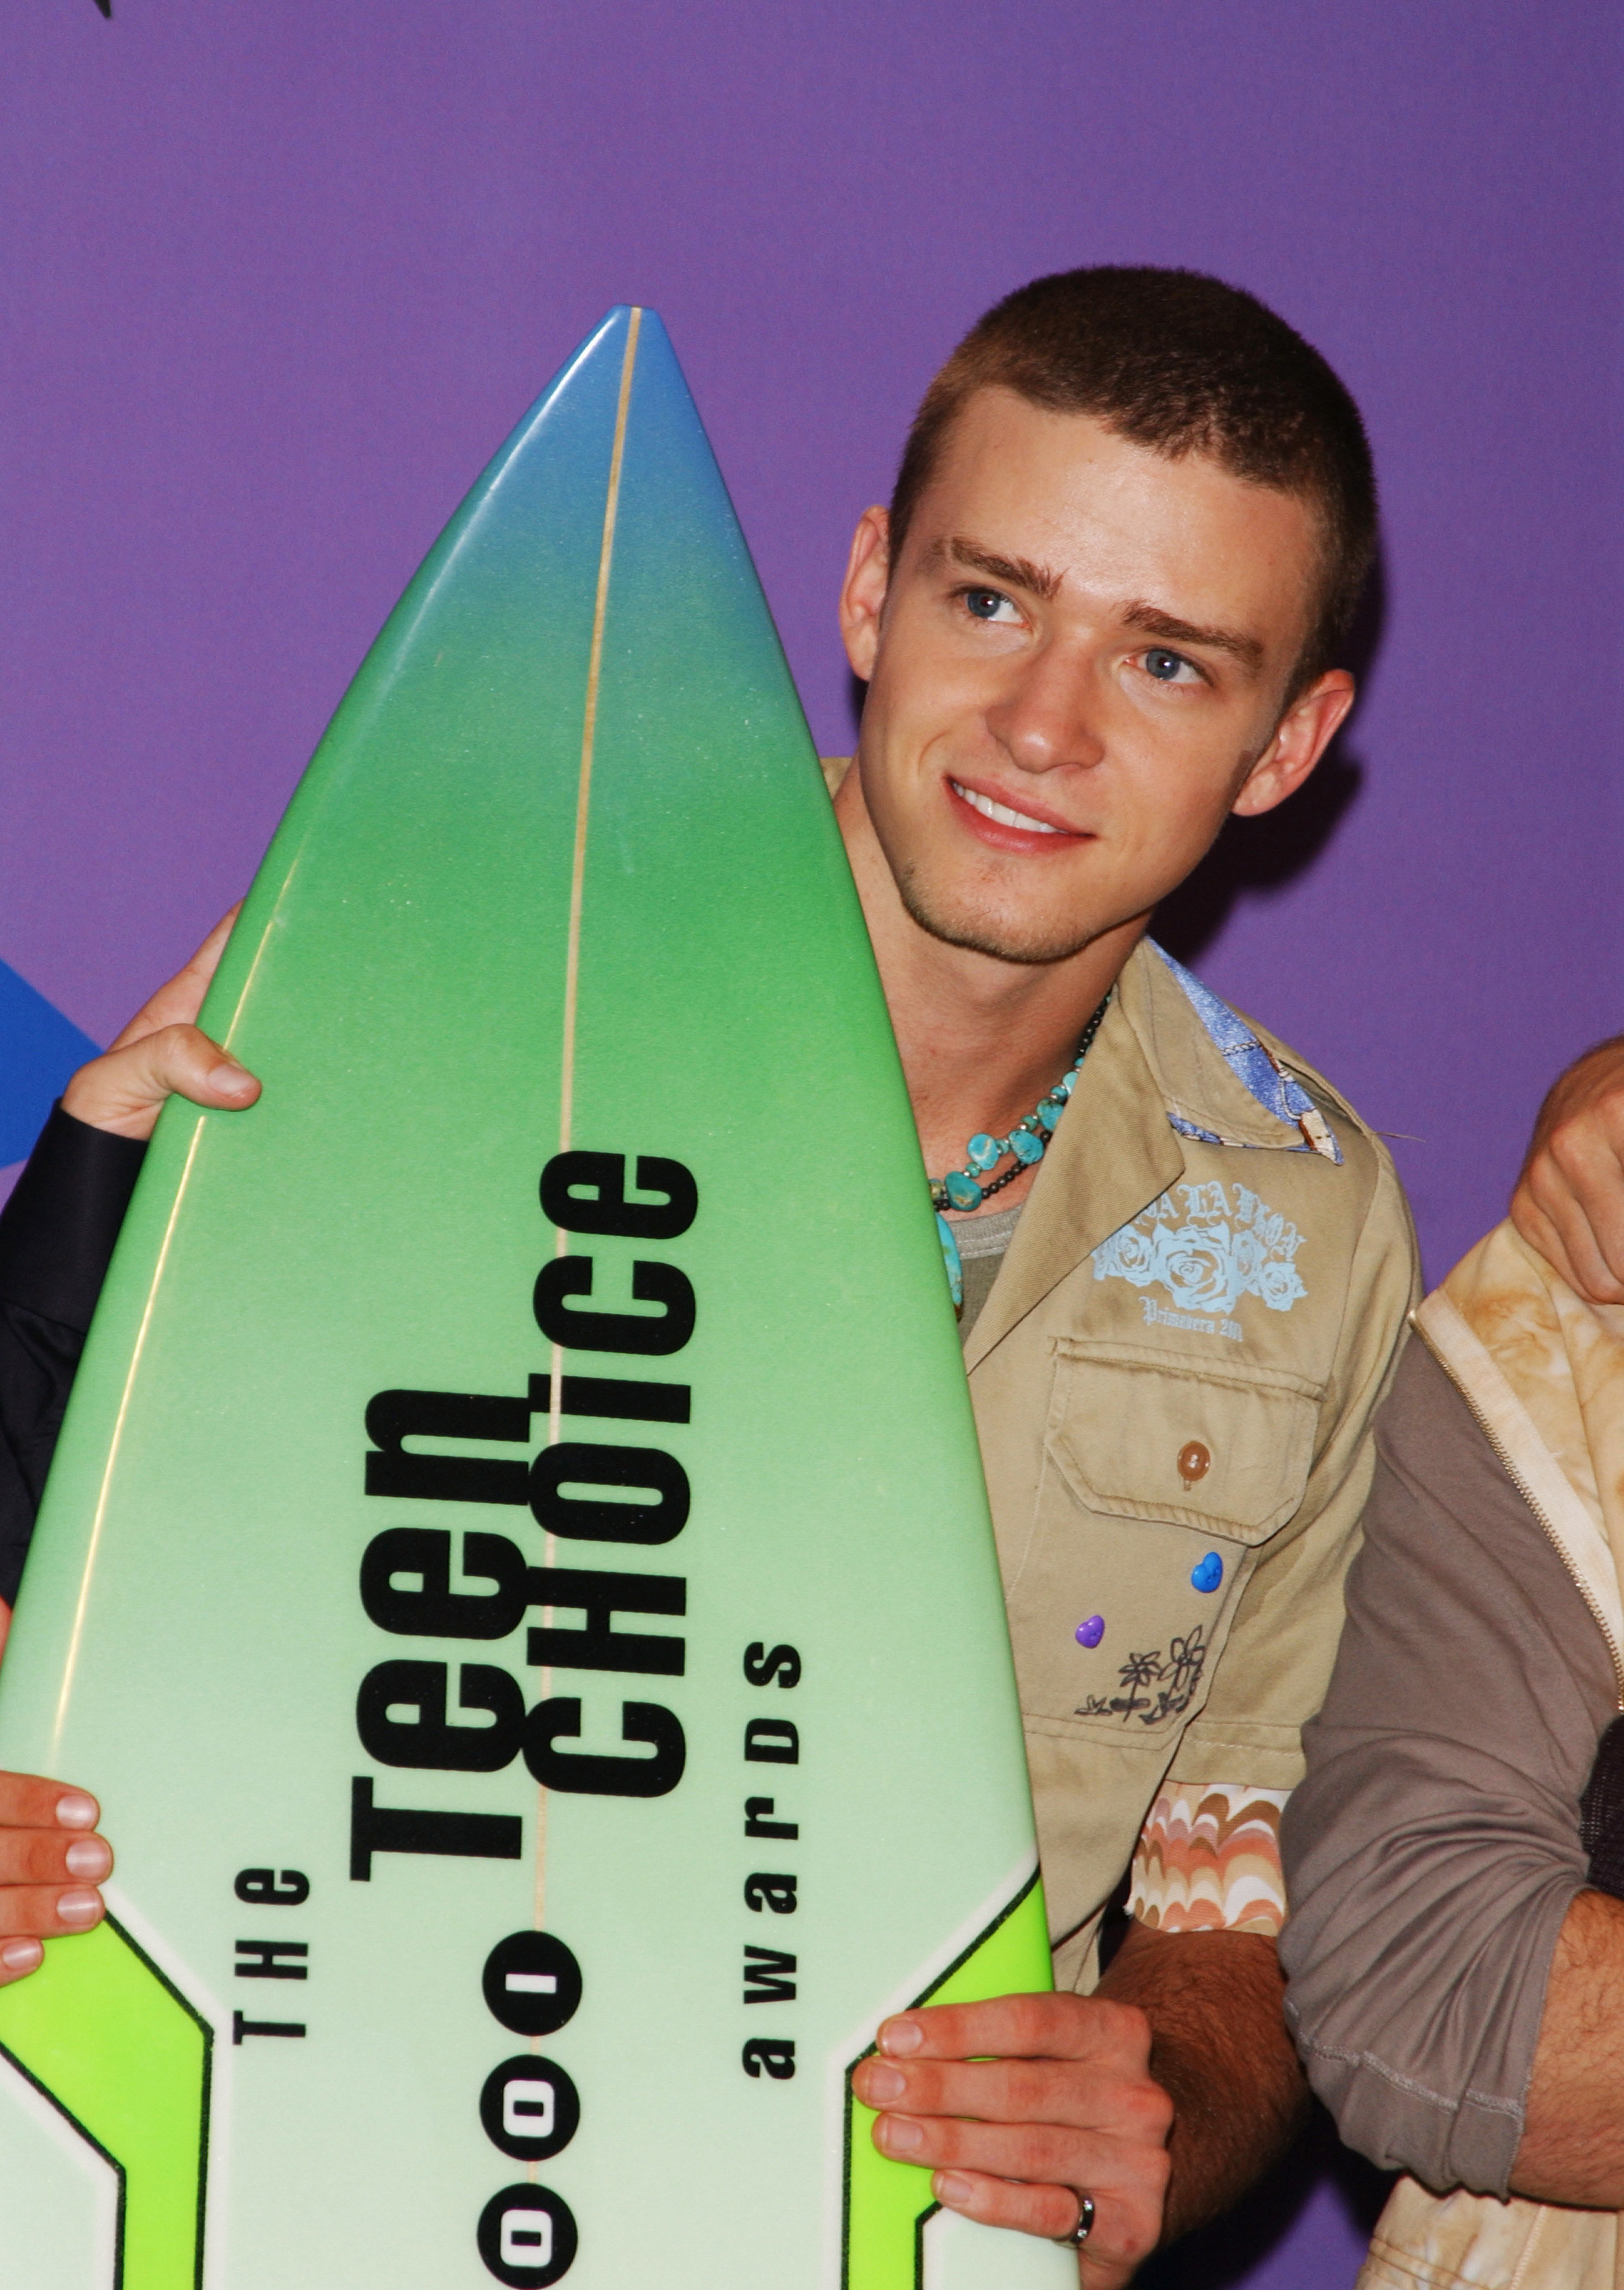 Justin Timberlake holding a surfboard